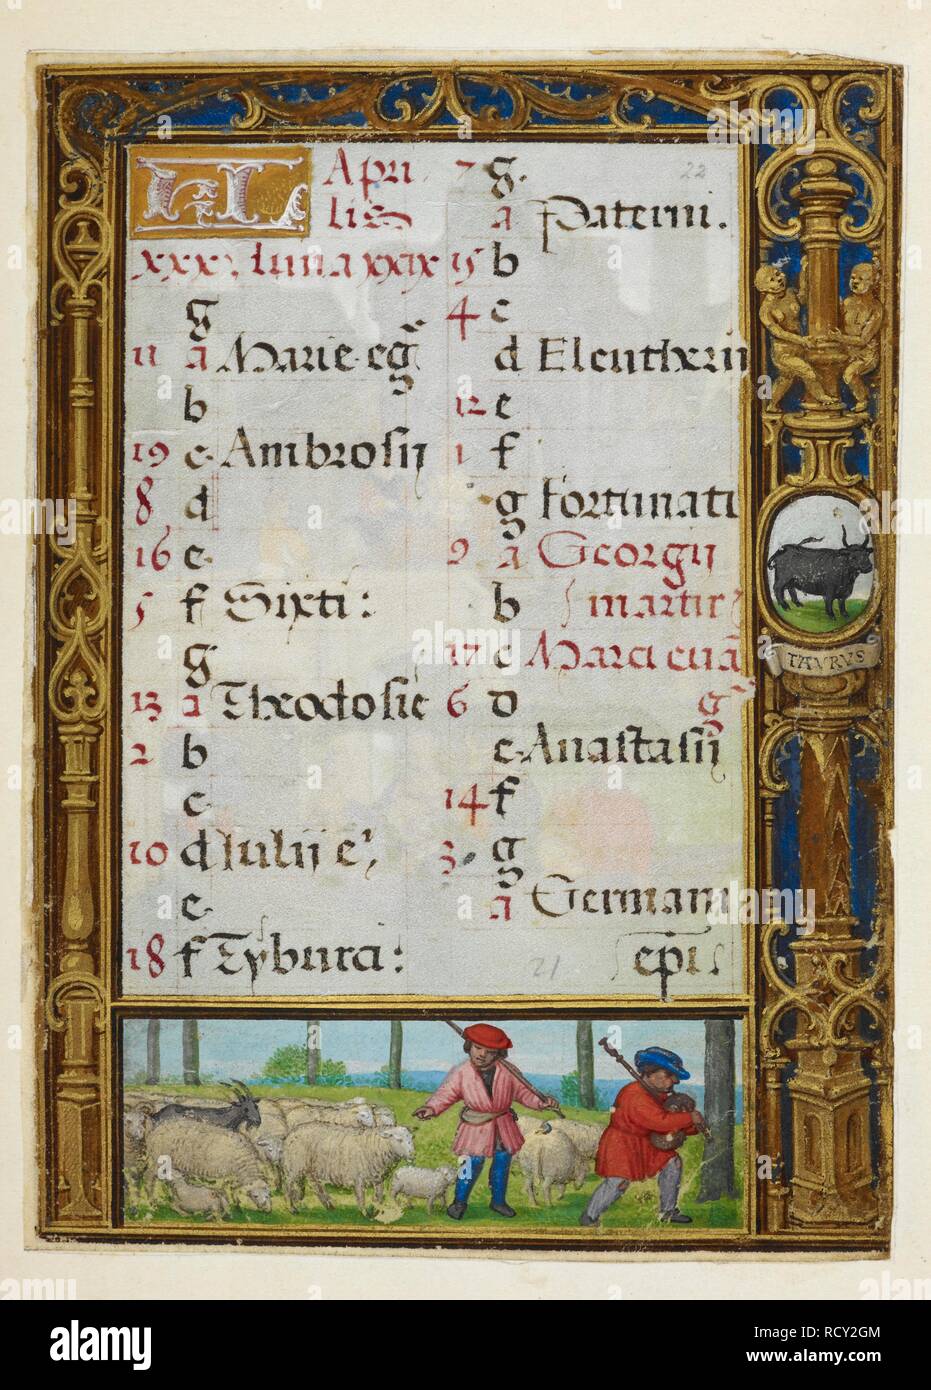 Calendar page for April. Initial, text and at the bottom, shepherds with a flock of sheep. The Golf Book. Netherlands, S. (Bruges). c. 1520 - 1530. Source: Add. 24098 f.22. Language: Latin. Author: Workshop of Simon Bening. Stock Photo